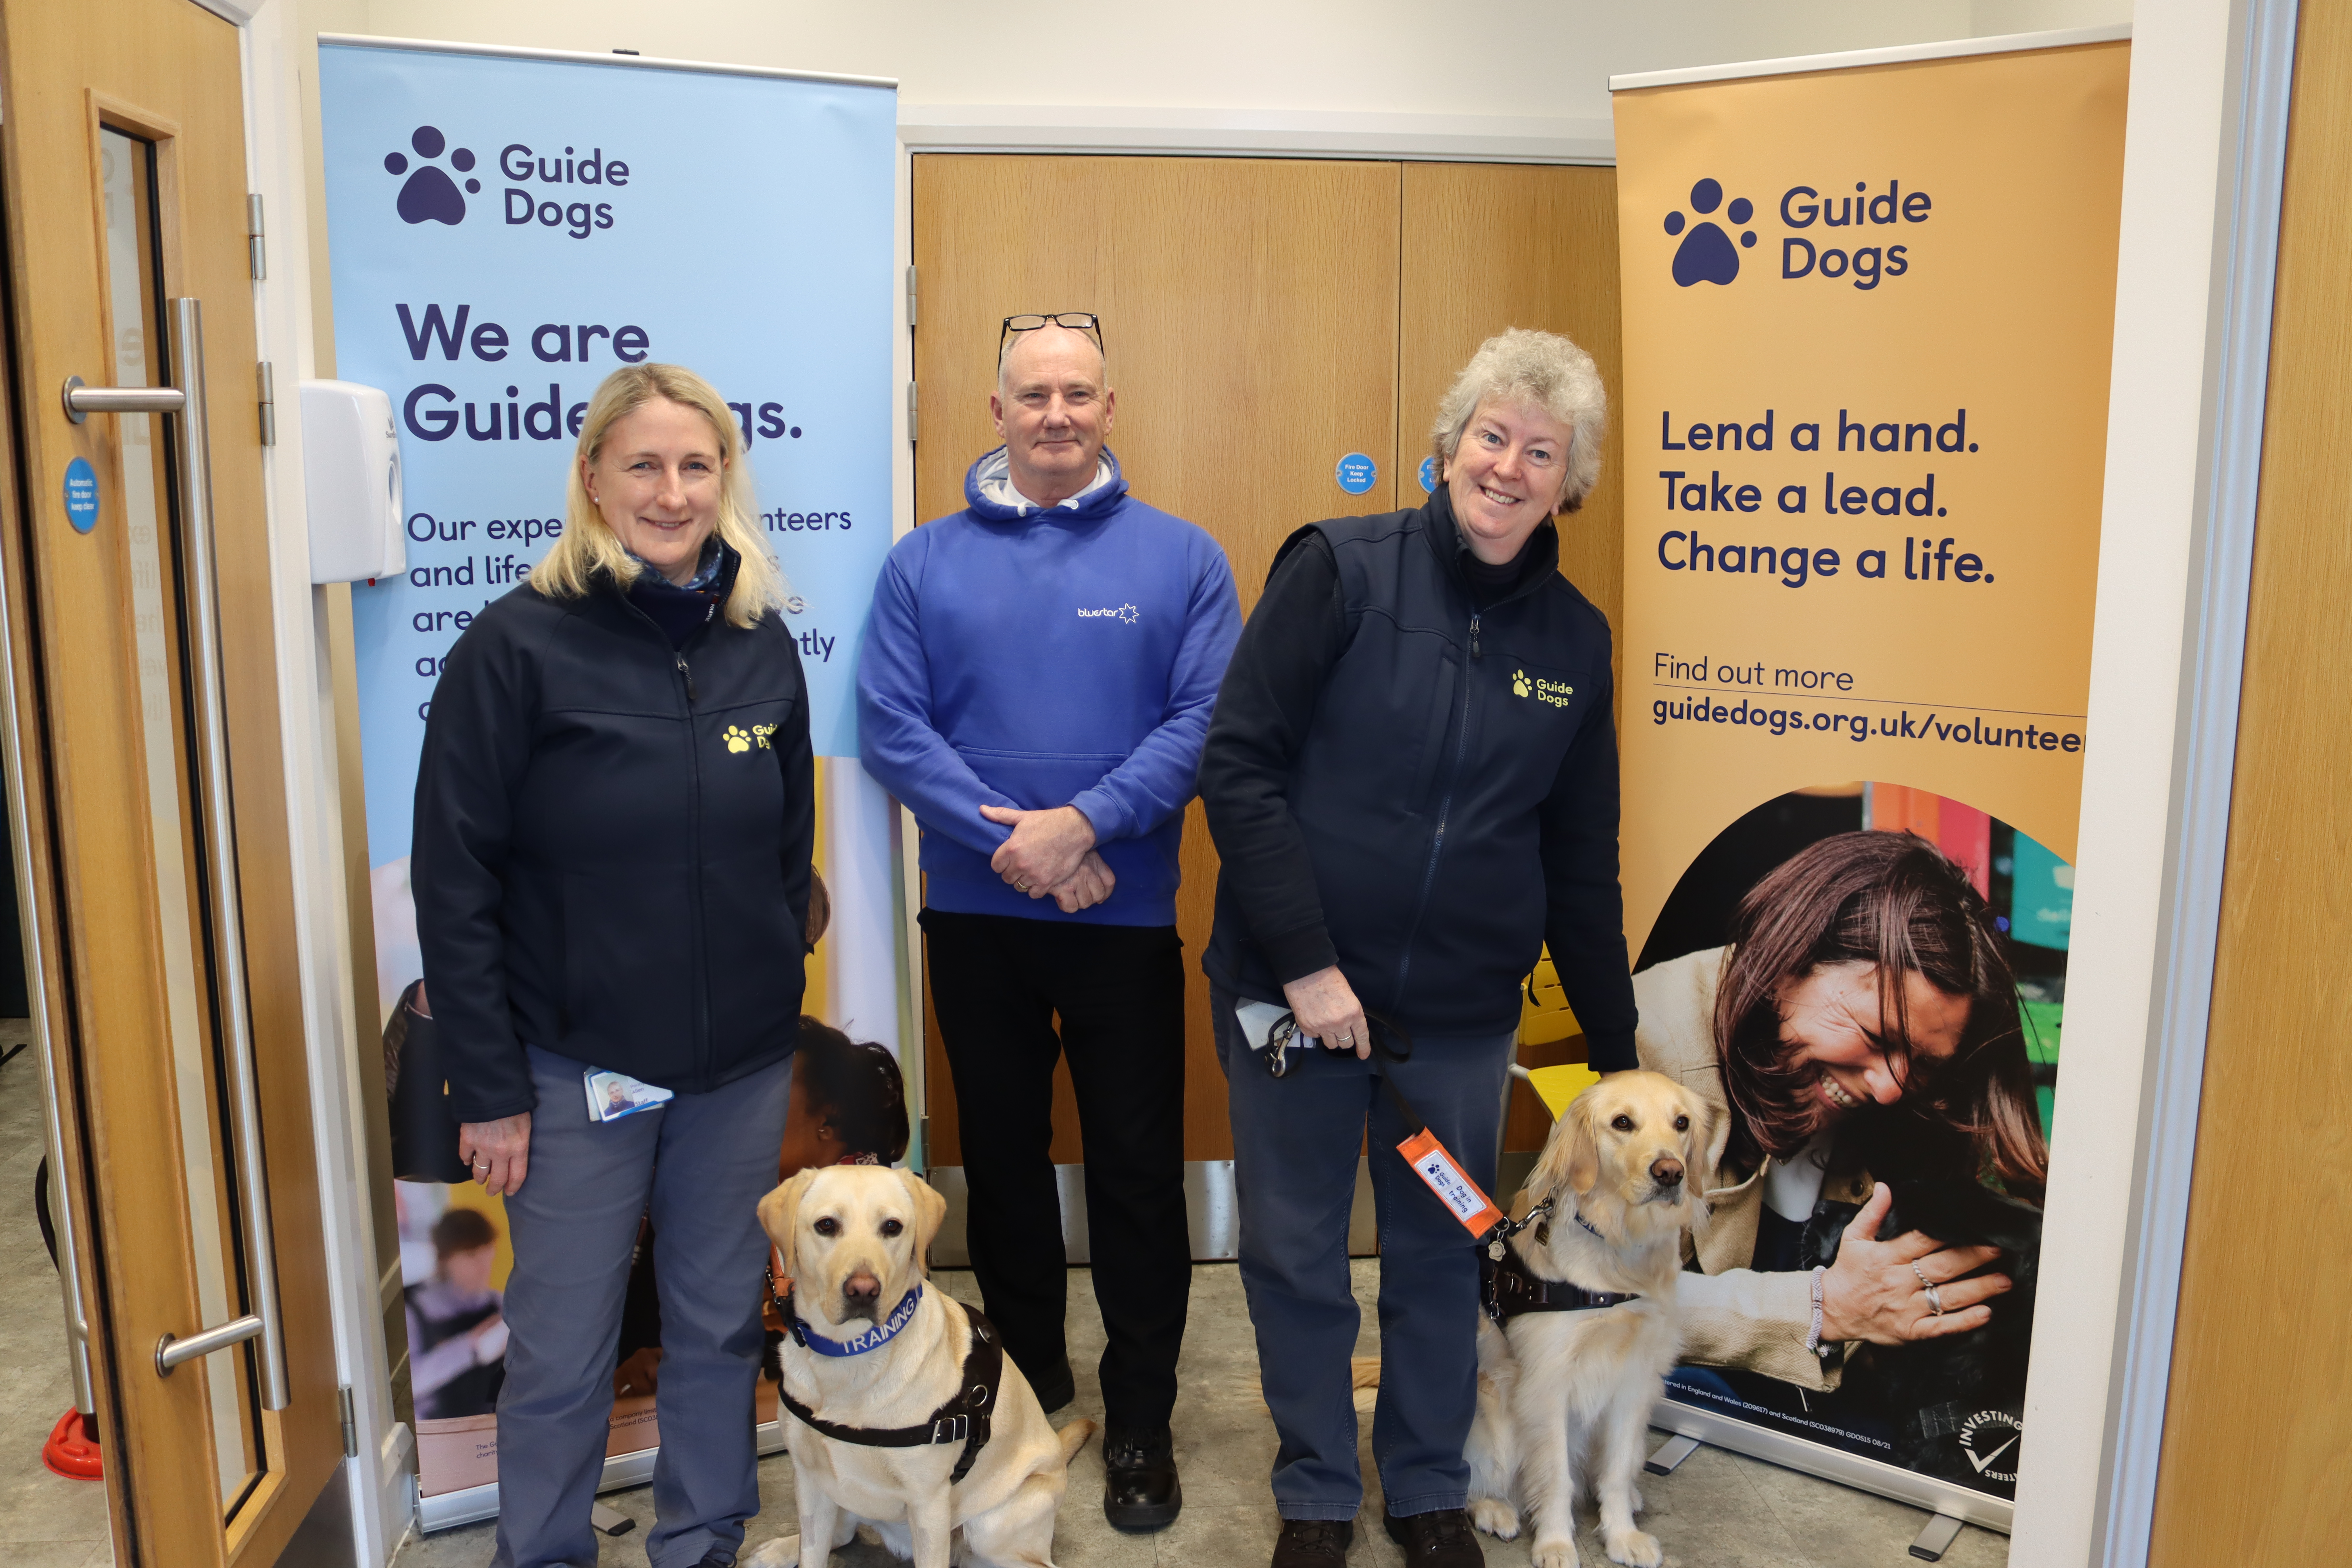 Bluestar representative with two guide dogs and their trainers